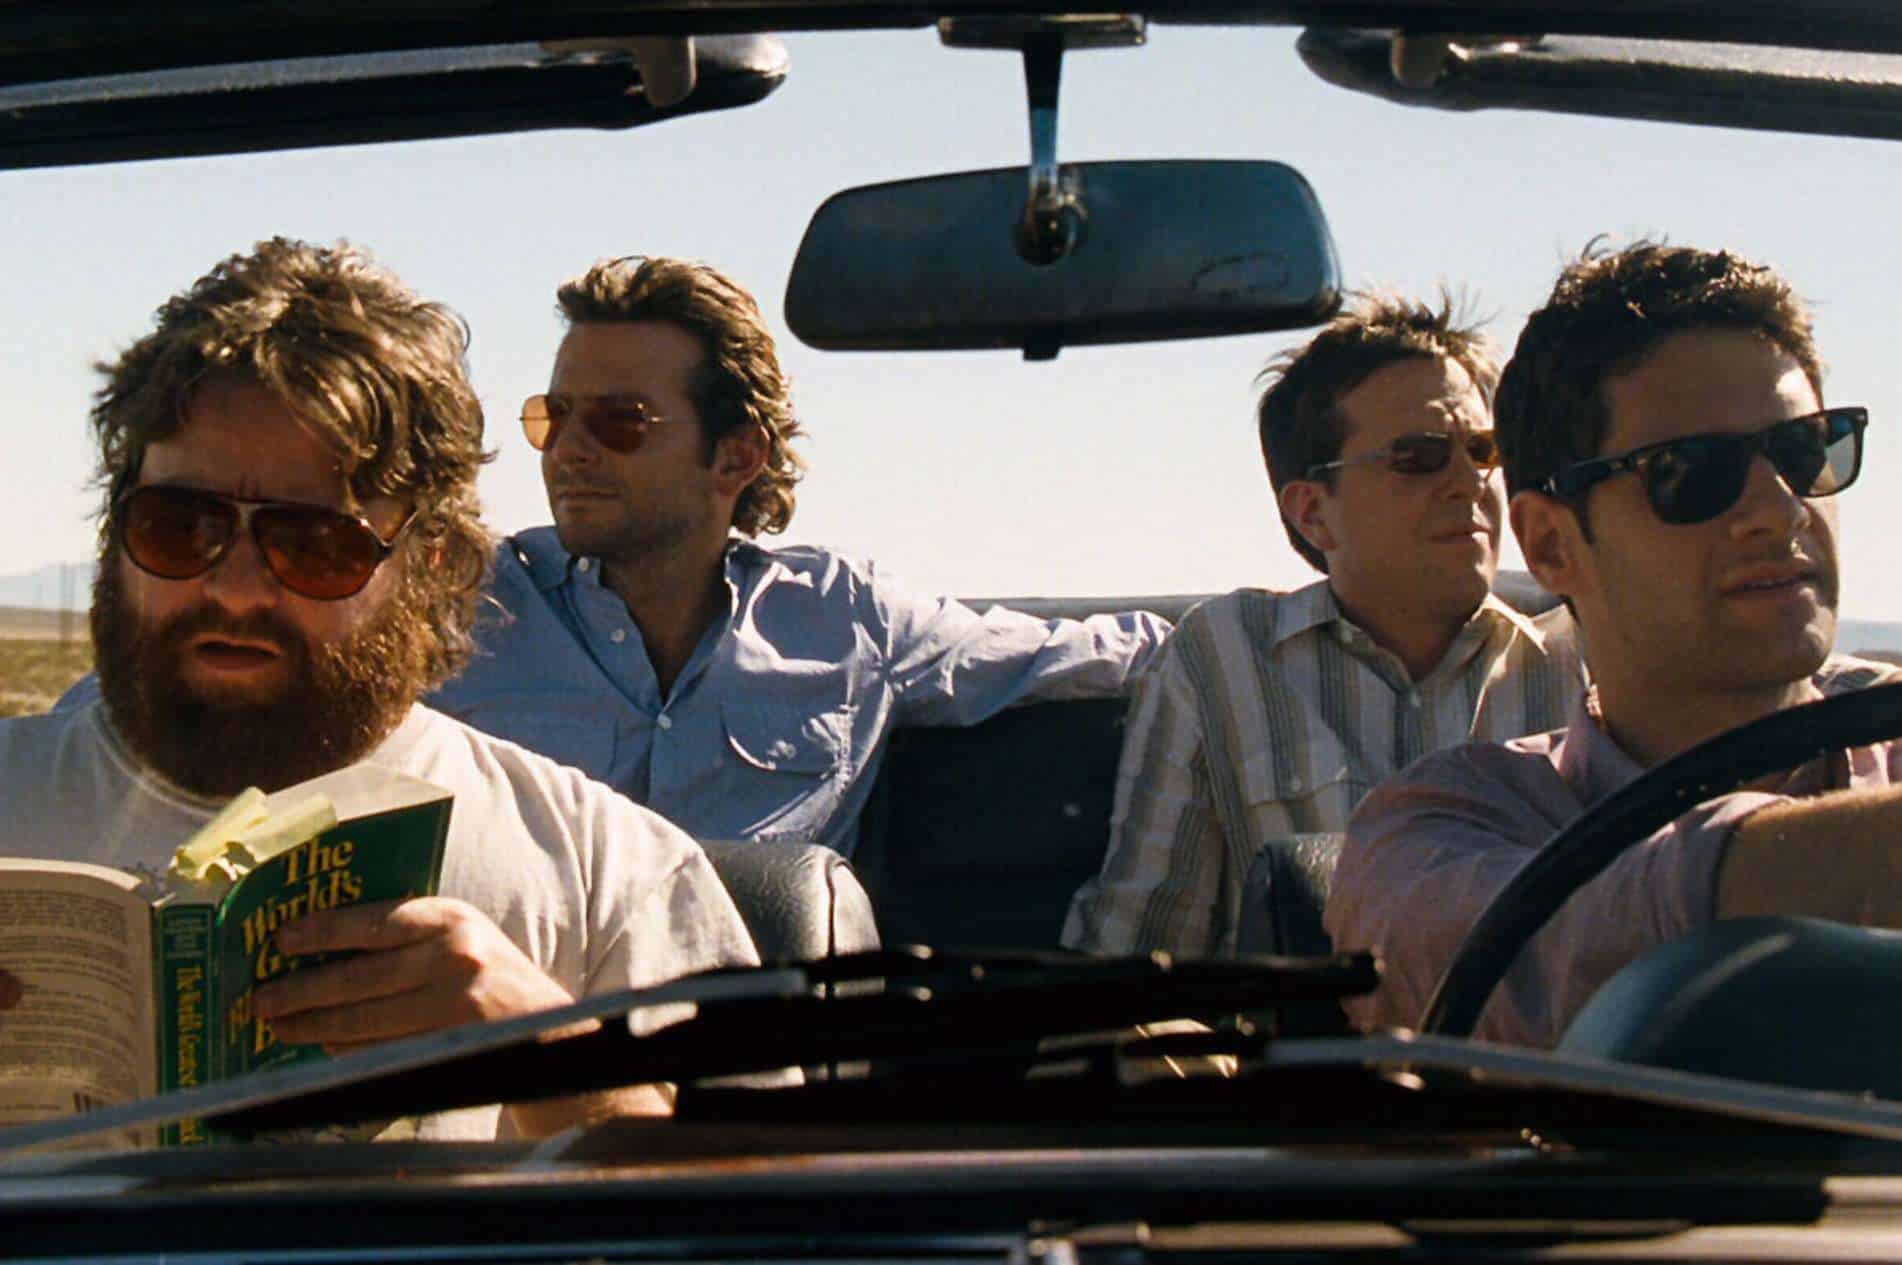 Best Movies Like The Hangover to Check Out